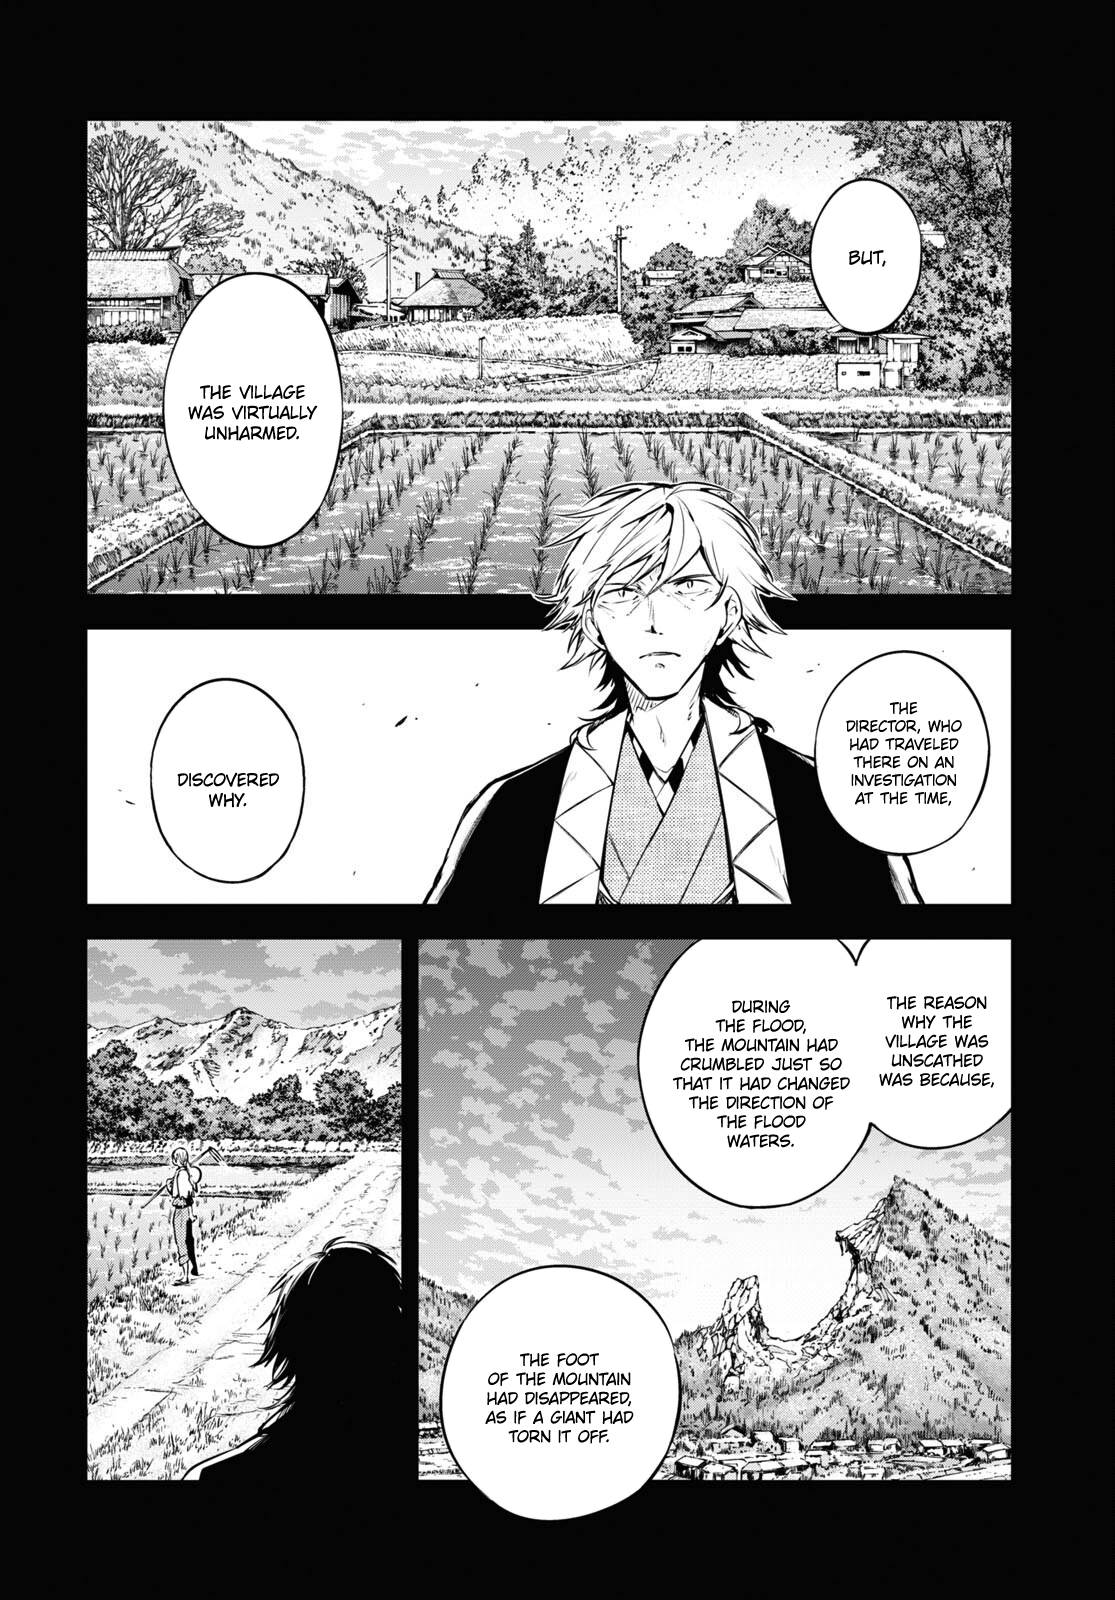 Bungo Stray Dogs Chapter 100.5